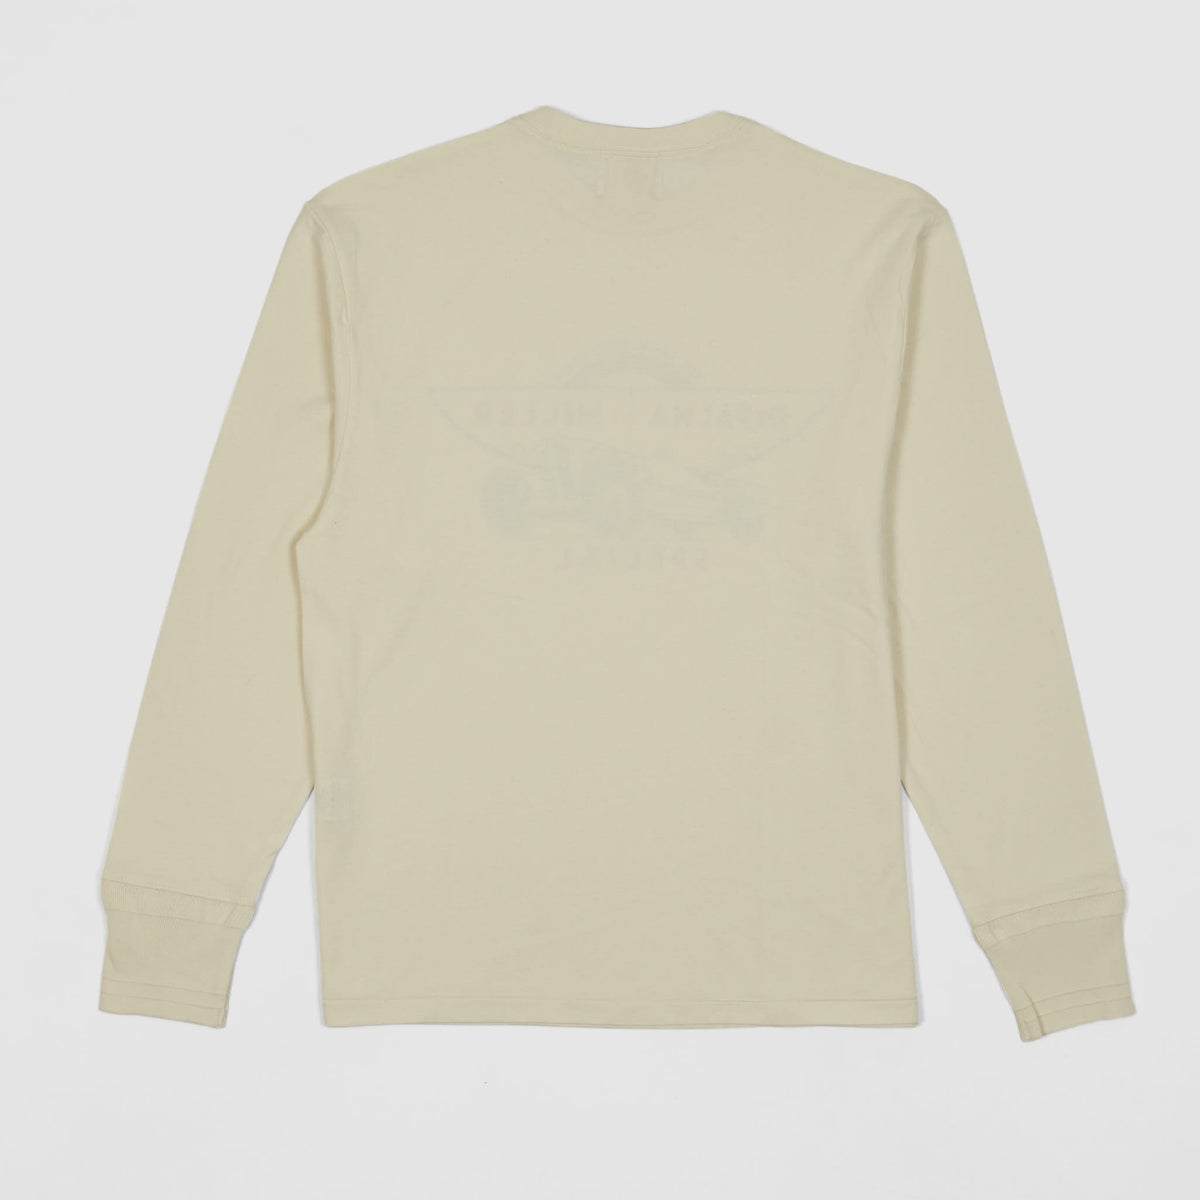 Old Crow Speed Shop by Glad Hand &amp; Co. Crew Neck Long Sleeve T-Shirt